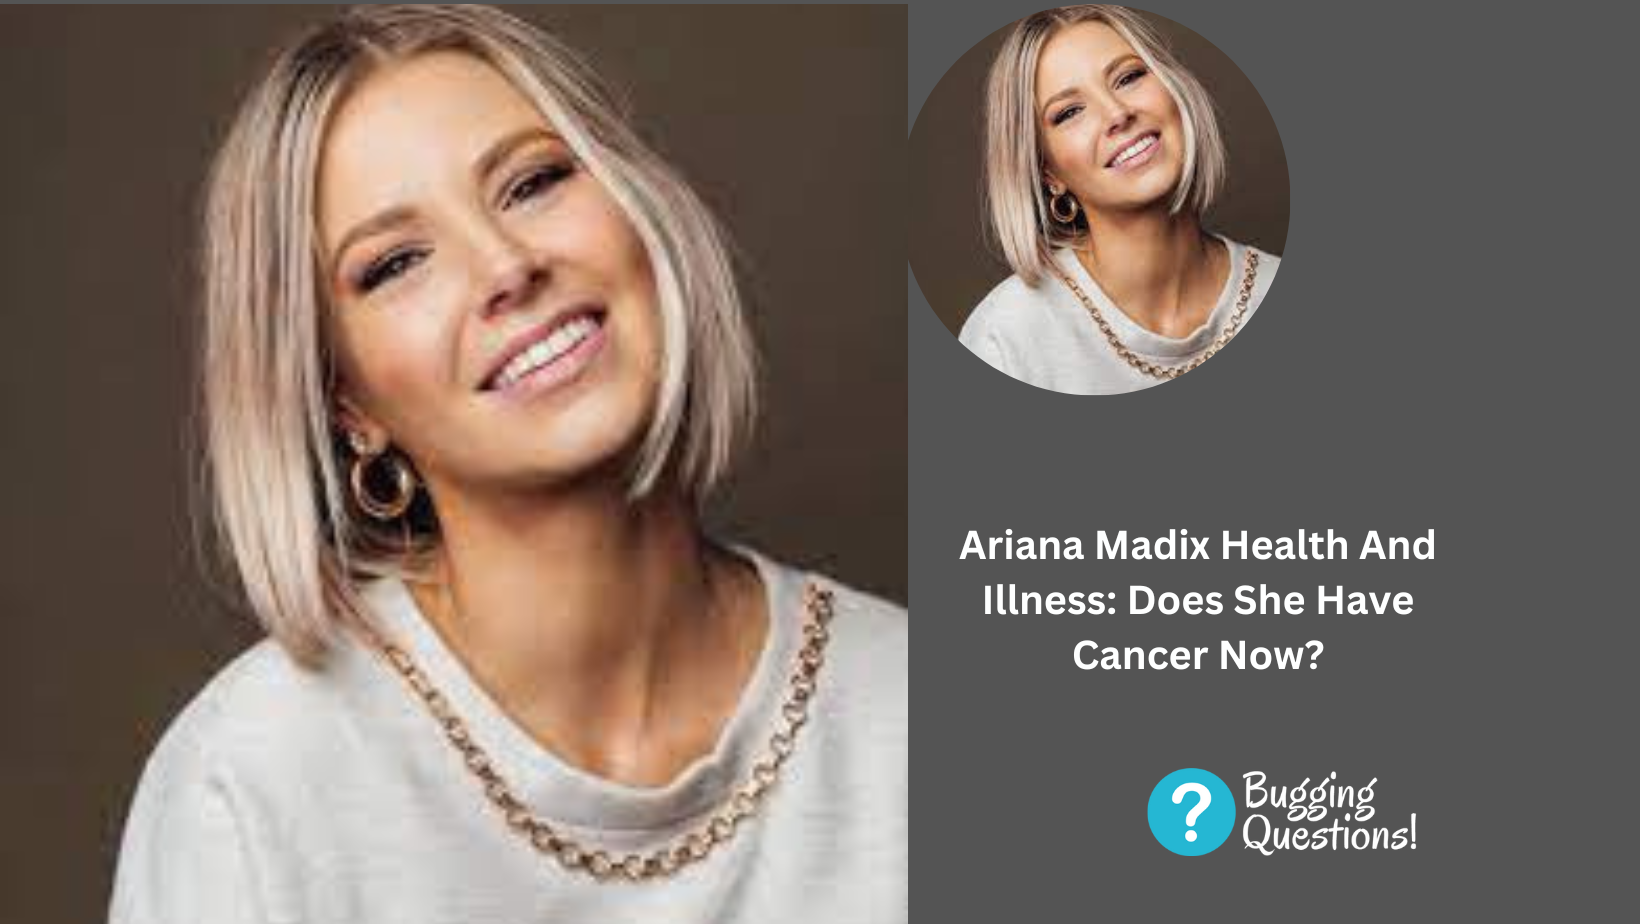 Ariana Madix Health And Illness: Does She Have Cancer Now?